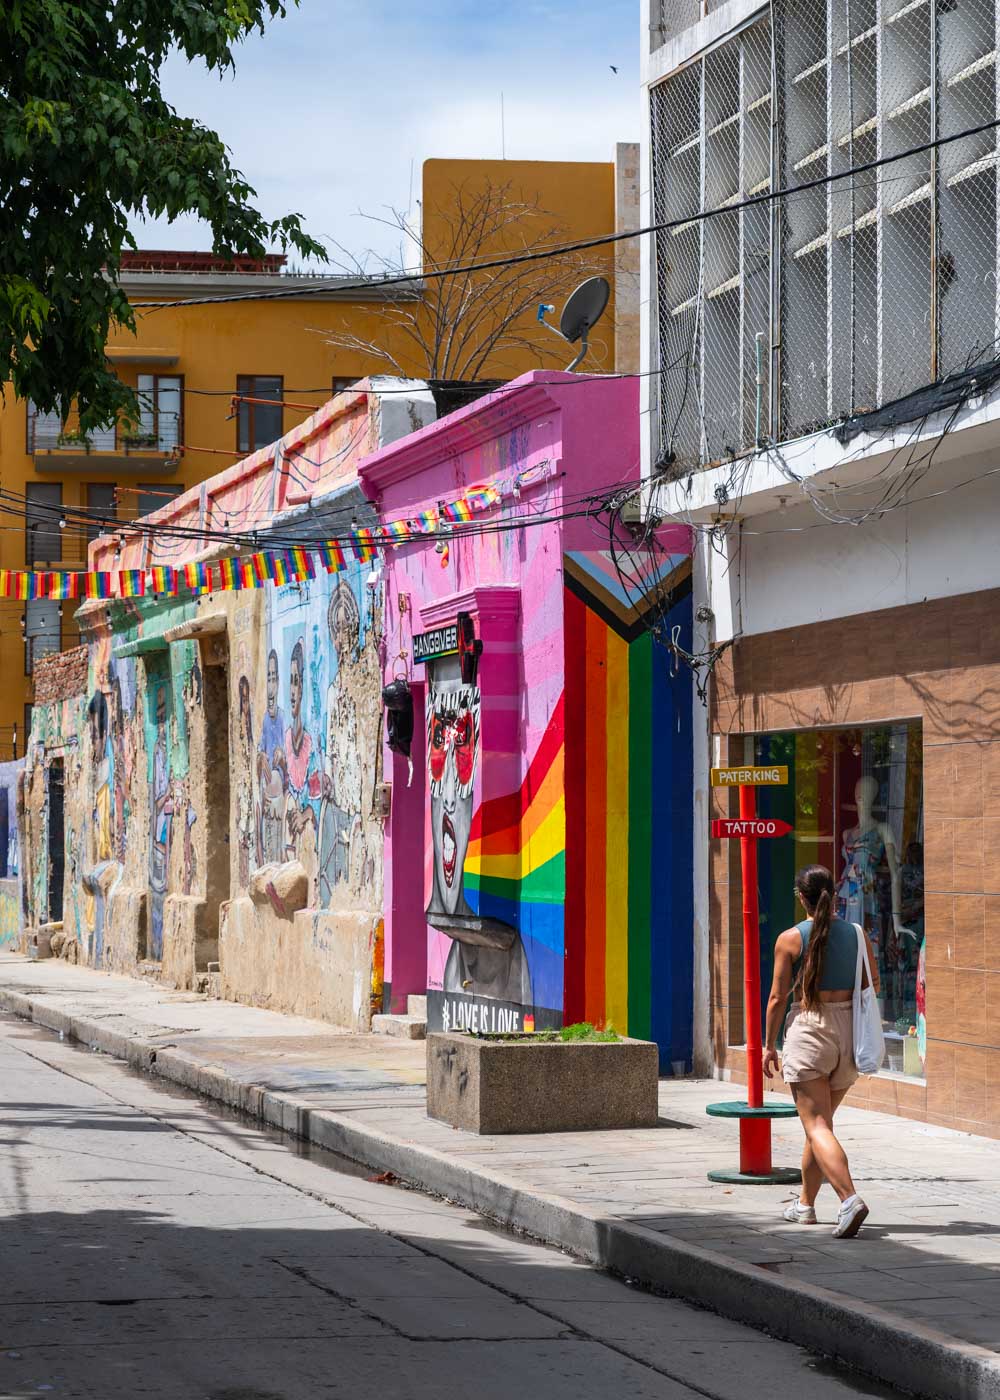 Sara walking down a colorful street past a oink and rainbow building on a sunny day in Santa Marta historic center.